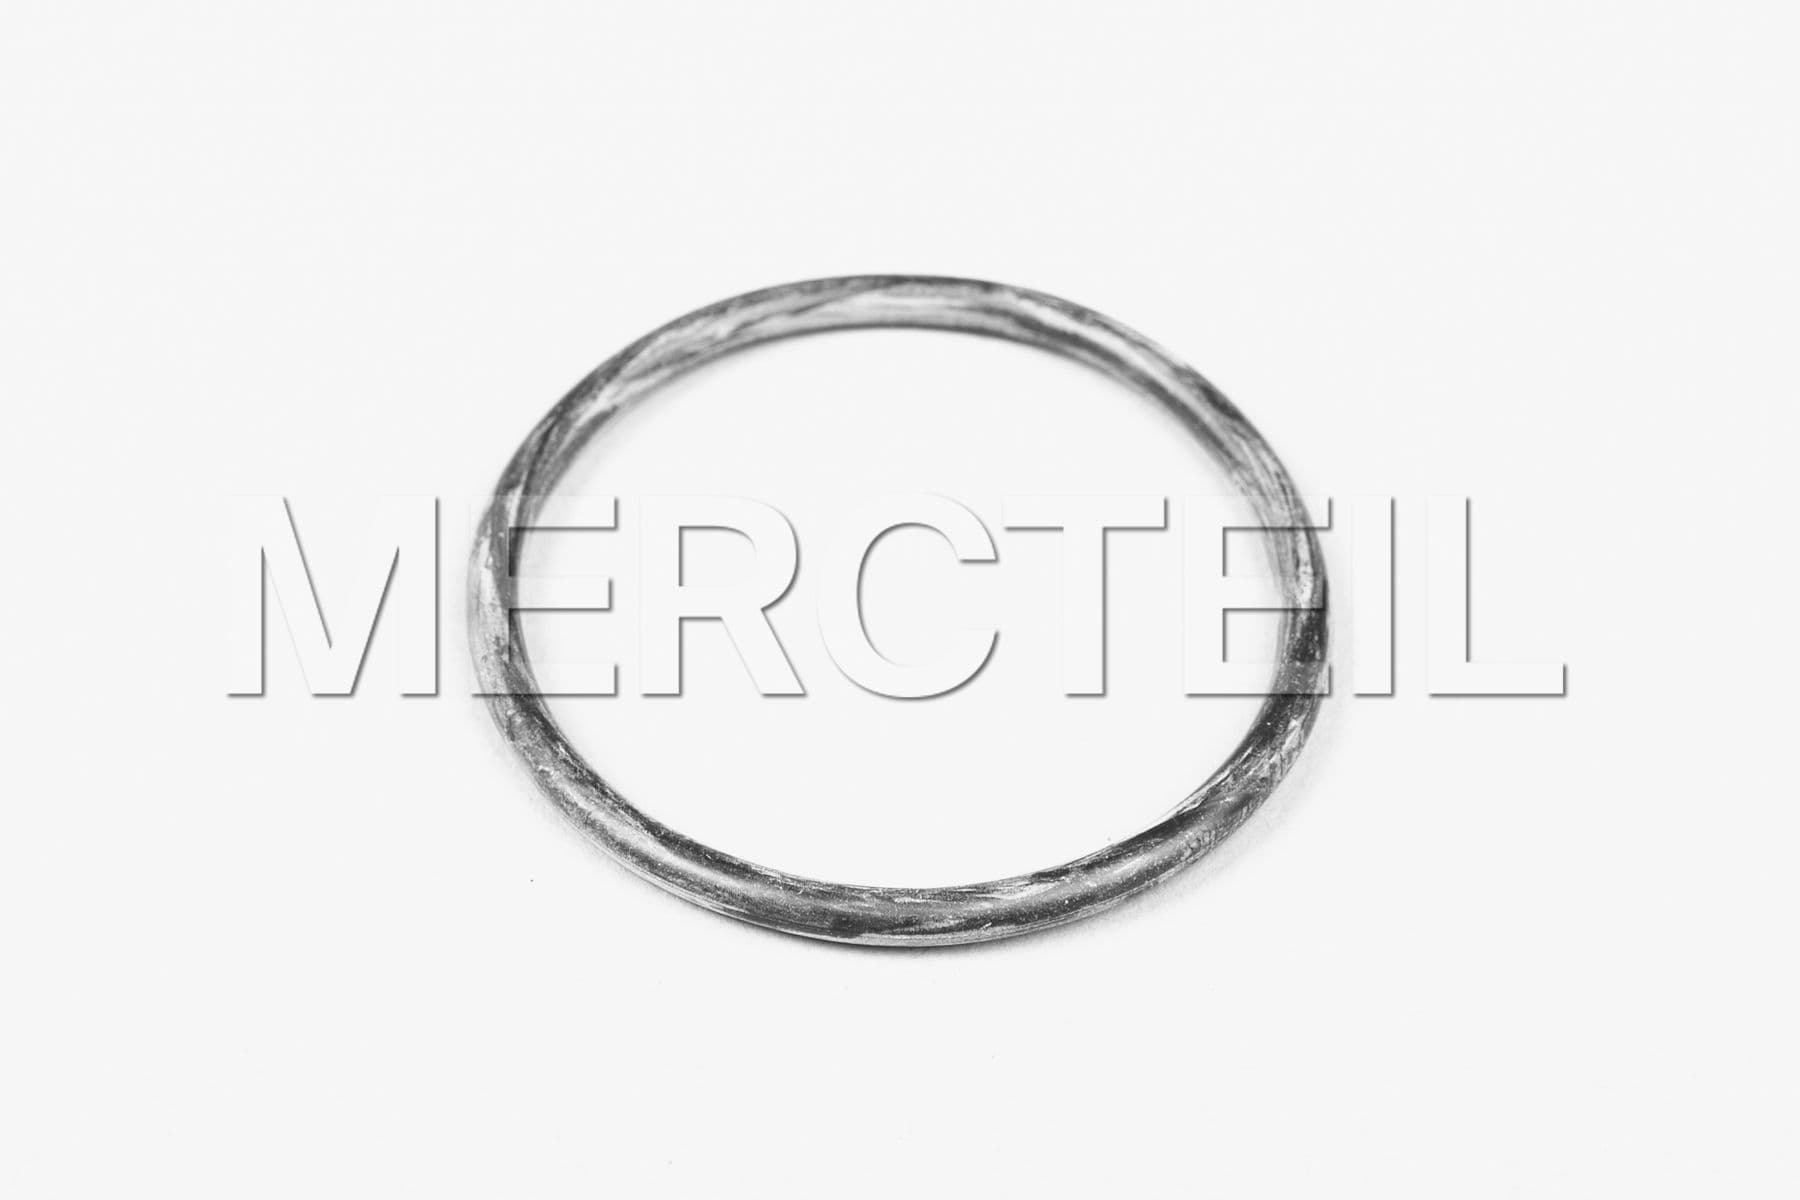 Buy the spare part Mercedes-Benz A0299978848 seal ring